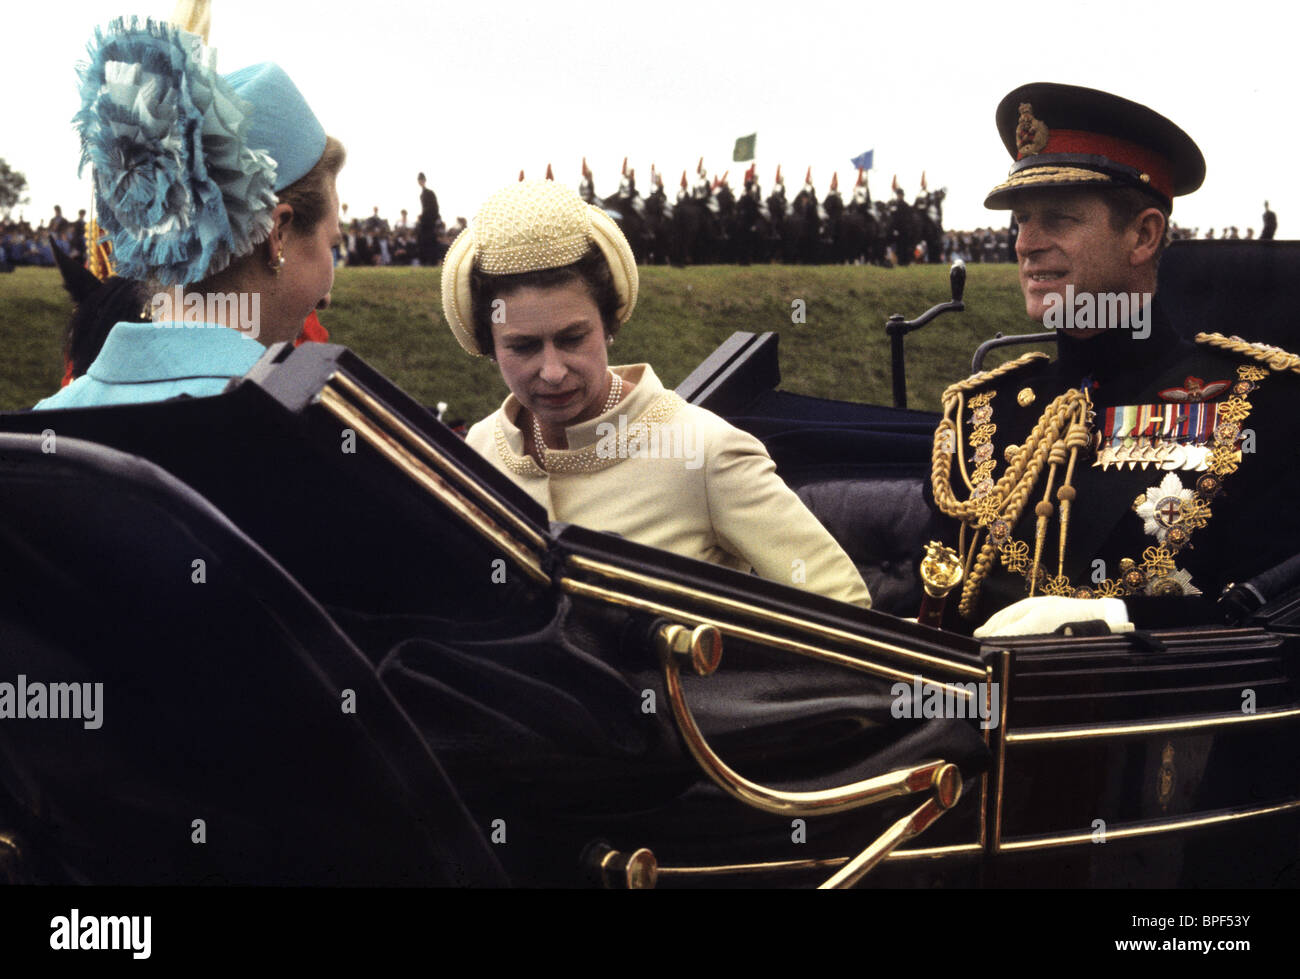 Her Majesty The Queen Prince Philip and Princess Anne on their way to Investiture of the Prince of Wales 1969 Stock Photo